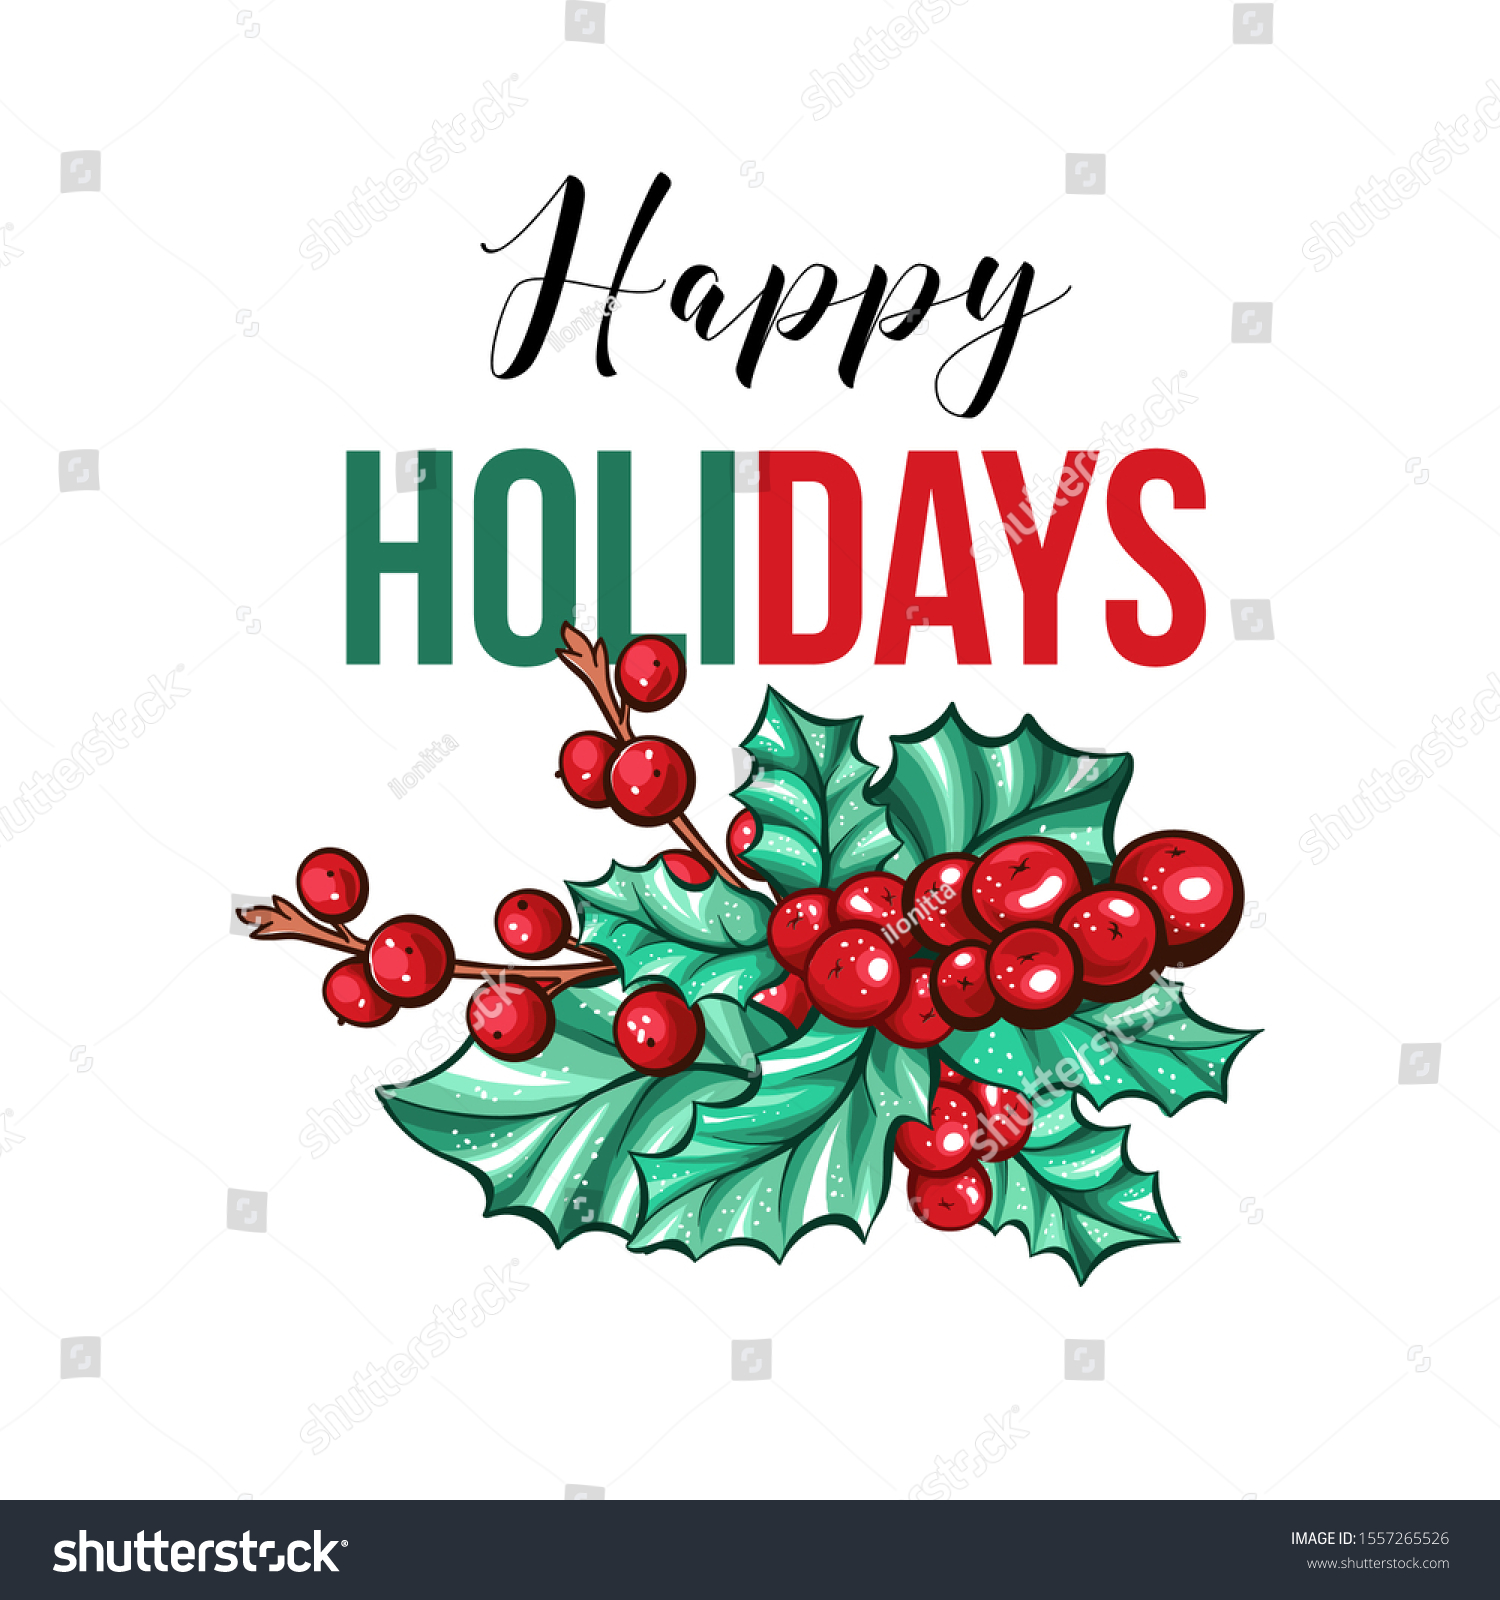 Happy Holidays Gift Card Template Holly Stock Vector (Royalty Free